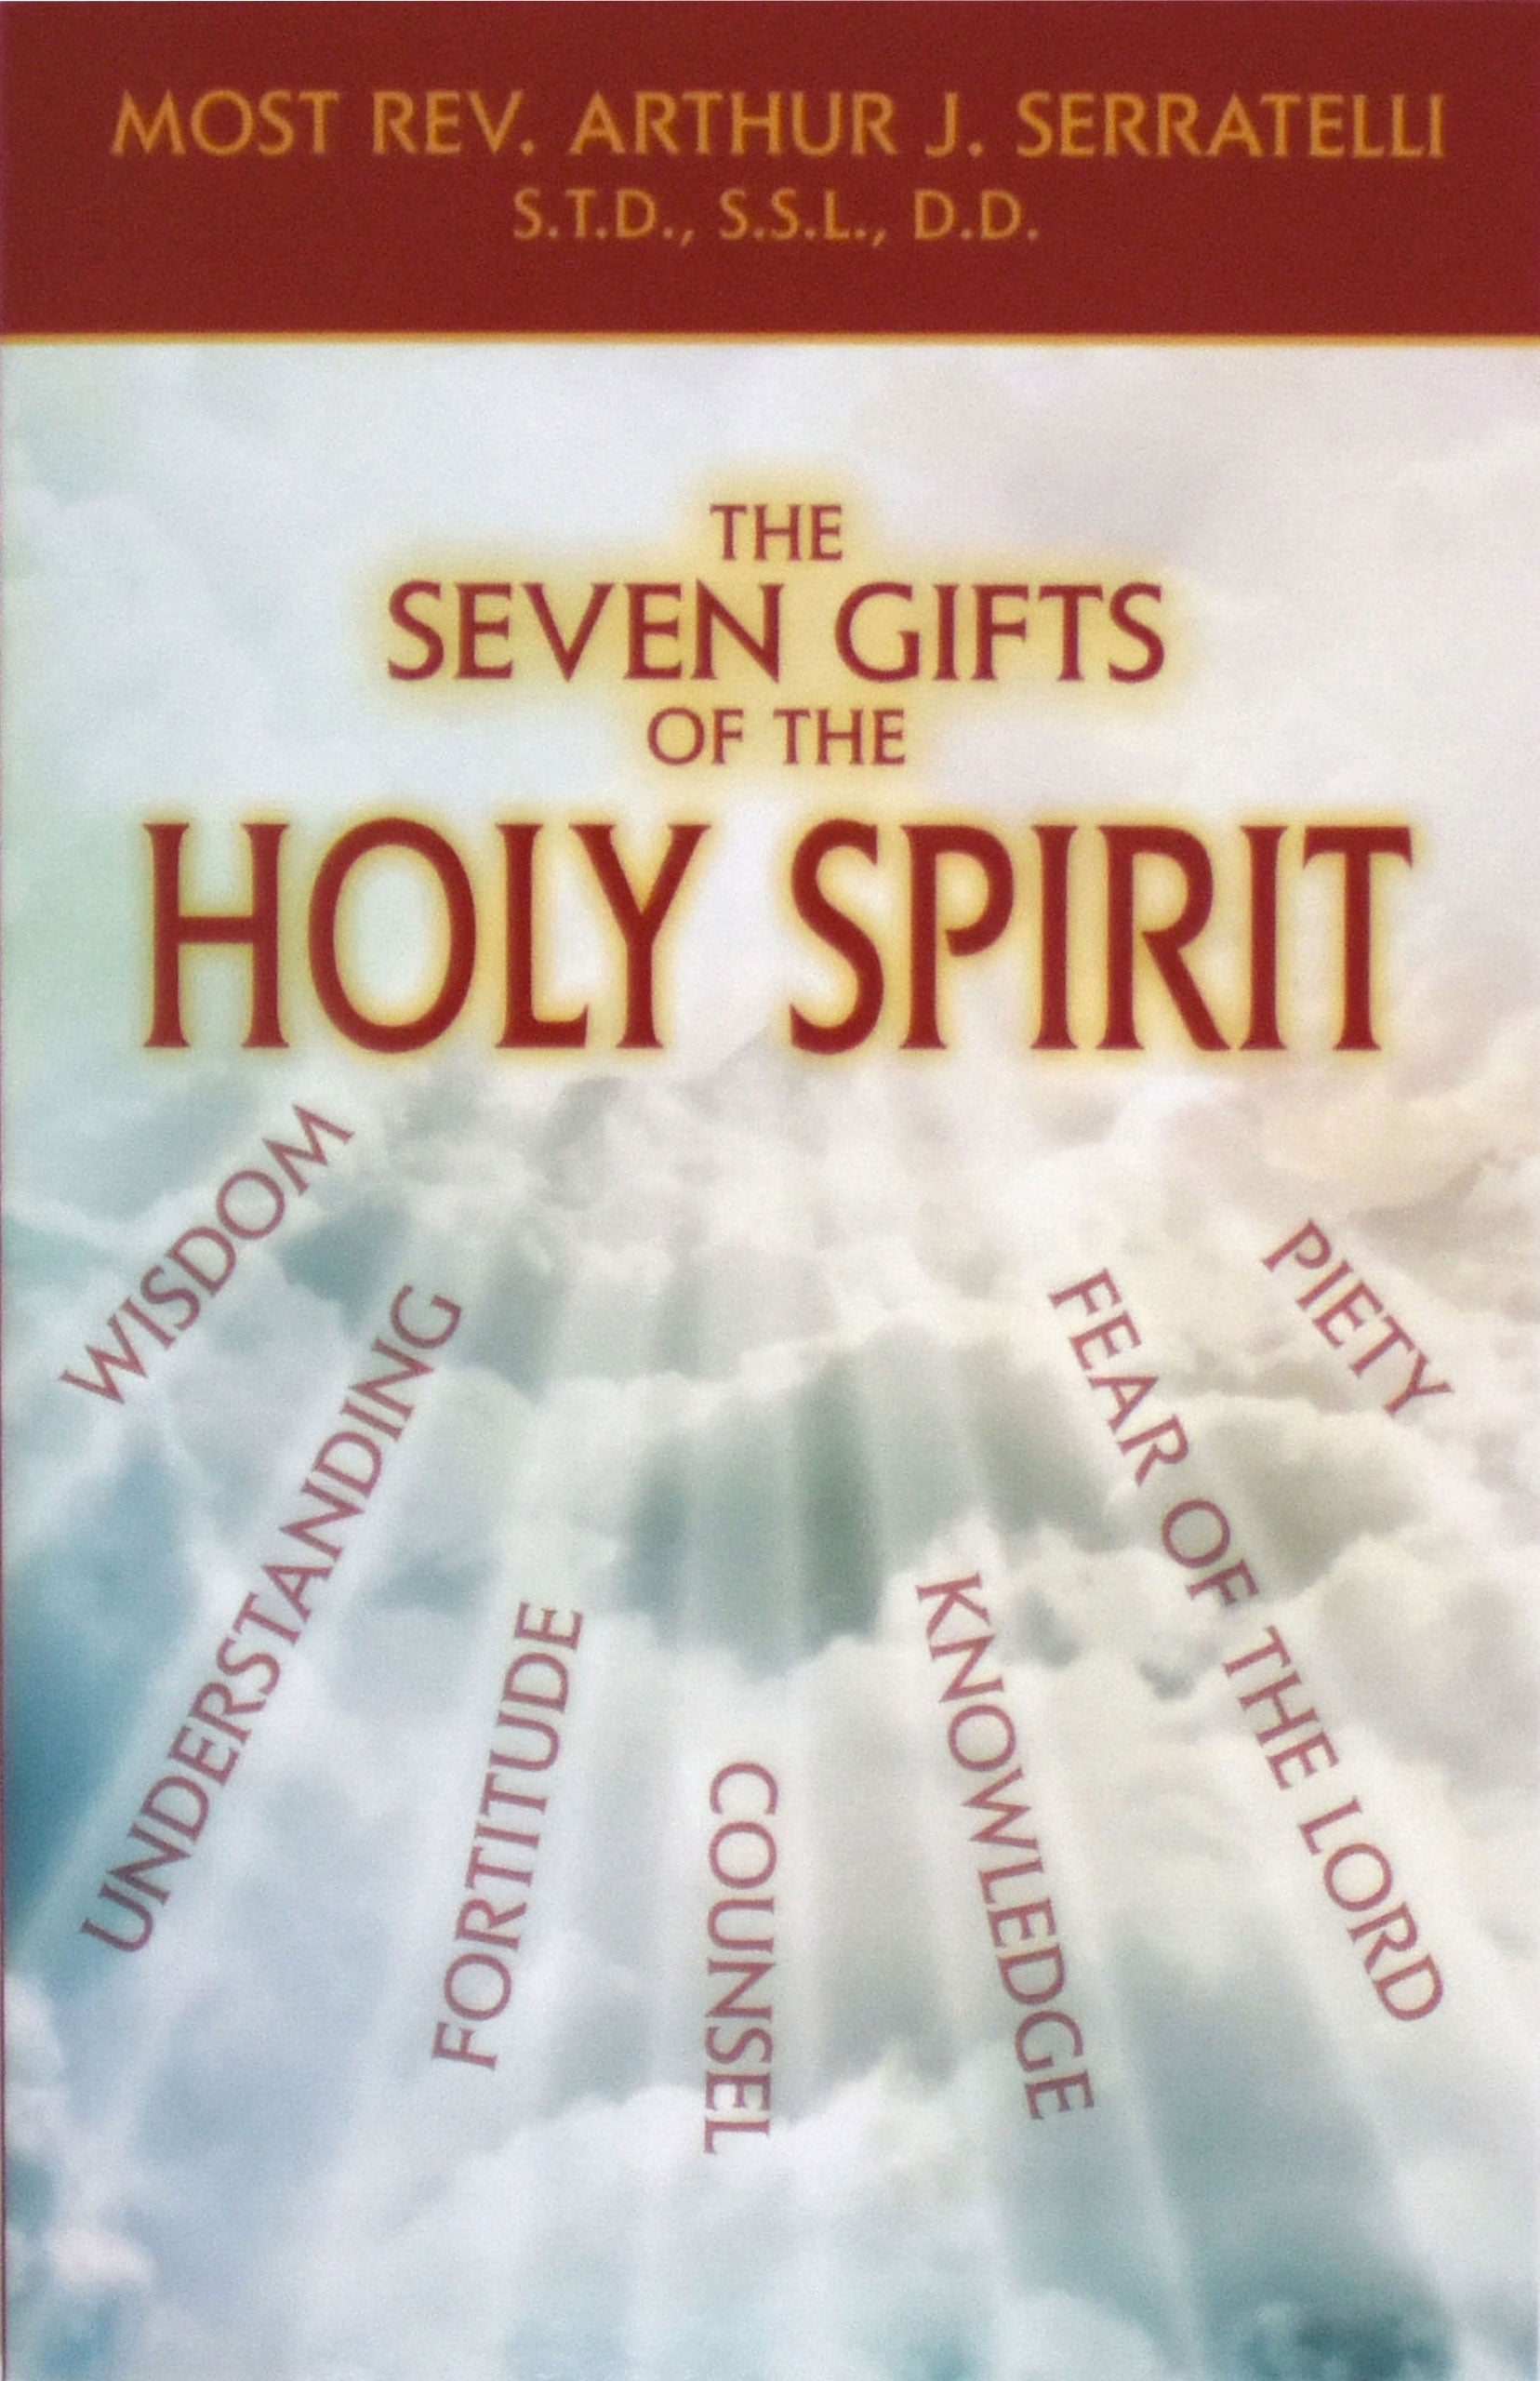 Anointed: Gifts of the Holy Spirit (Hc): St. Paul, Jaymie Stuart Wolfe and  Daughters of: 9780819806536: Amazon.com: Books